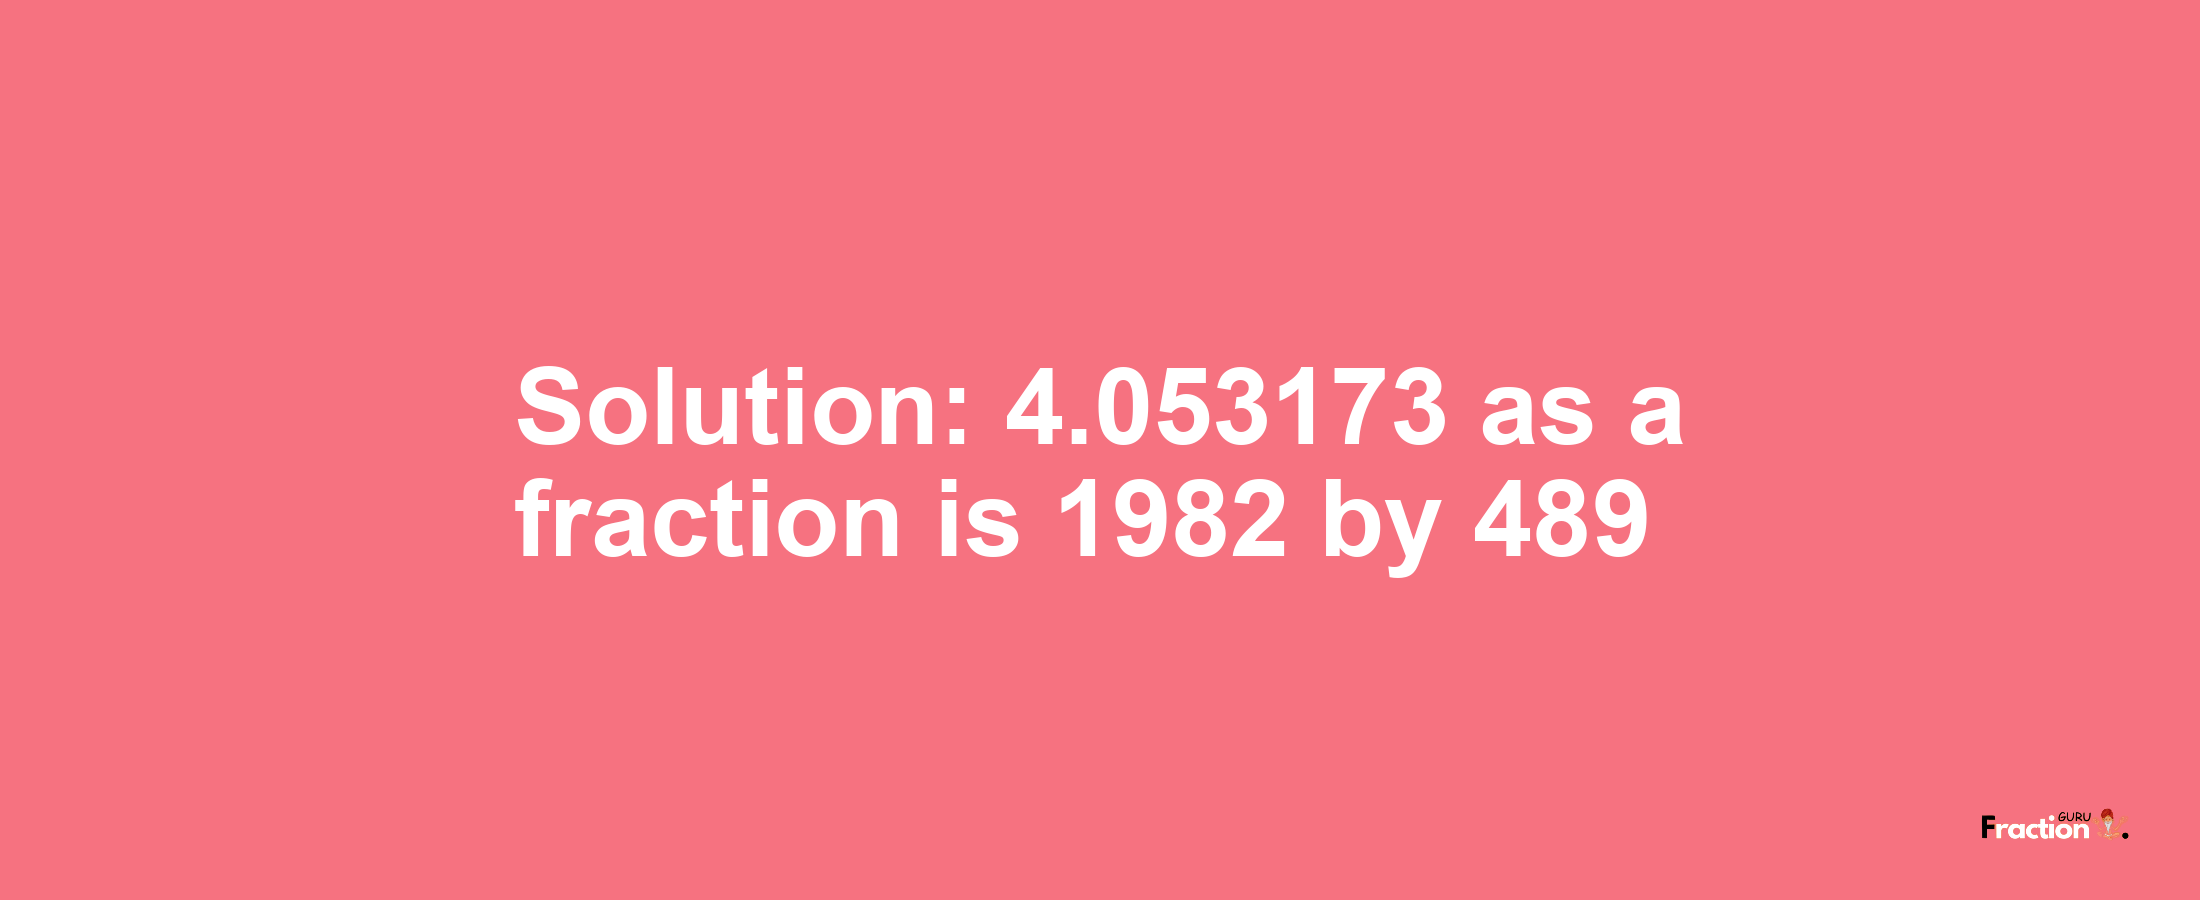 Solution:4.053173 as a fraction is 1982/489